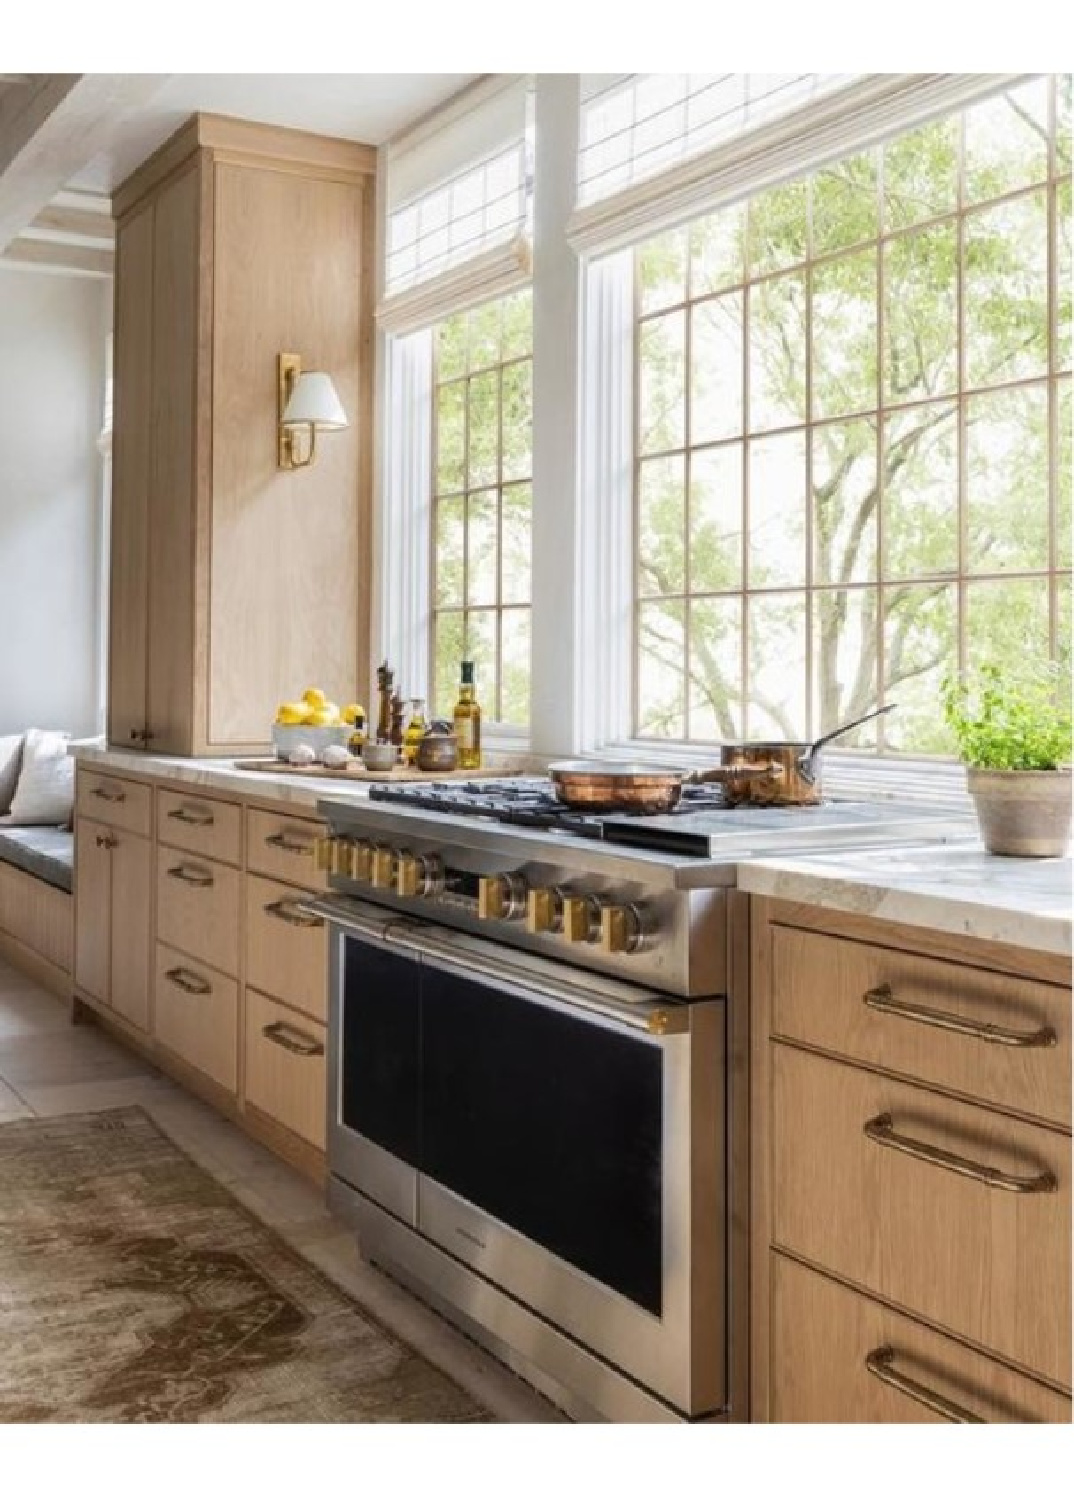 Rigby Small Sconce (Marie Flanigan for Visual Comfort) in a gorgeous organic luxe kitchen.